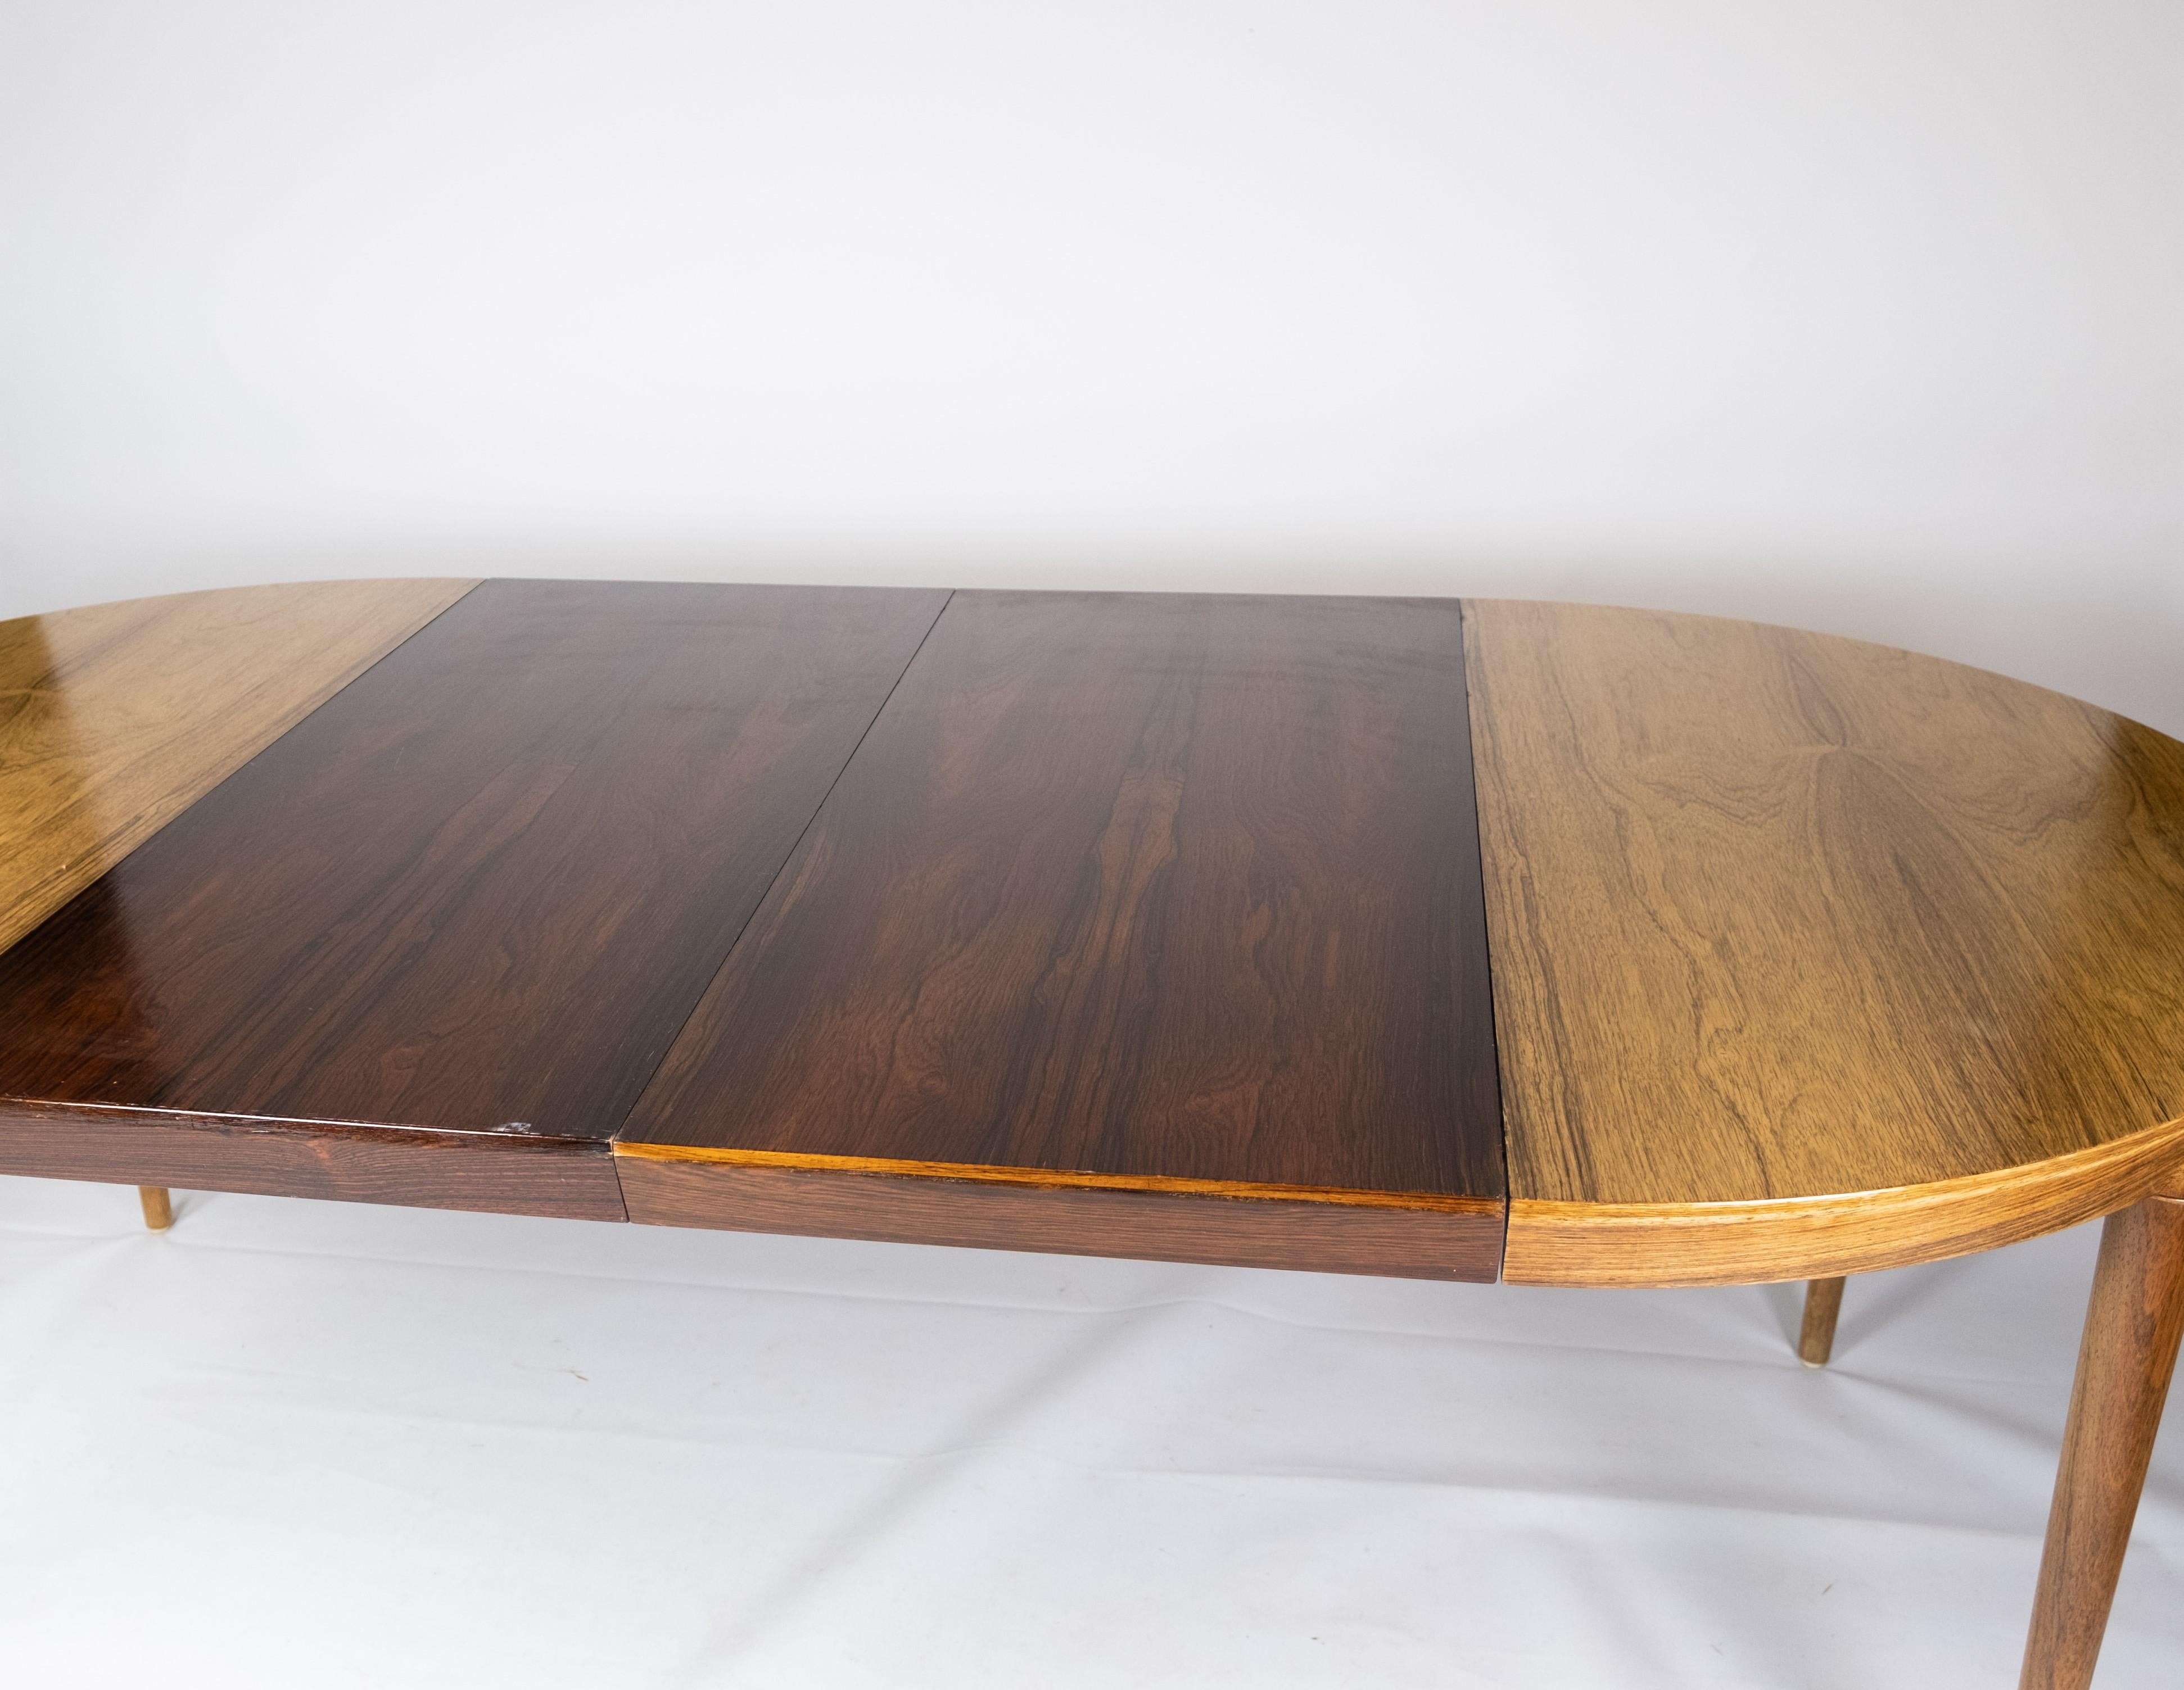 This dining table in rosewood exemplifies the exquisite craftsmanship of Danish design from the 1960s. Characterized by its rich tones and elegant lines, rosewood furniture from this era is highly sought after for its timeless appeal.

Crafted with